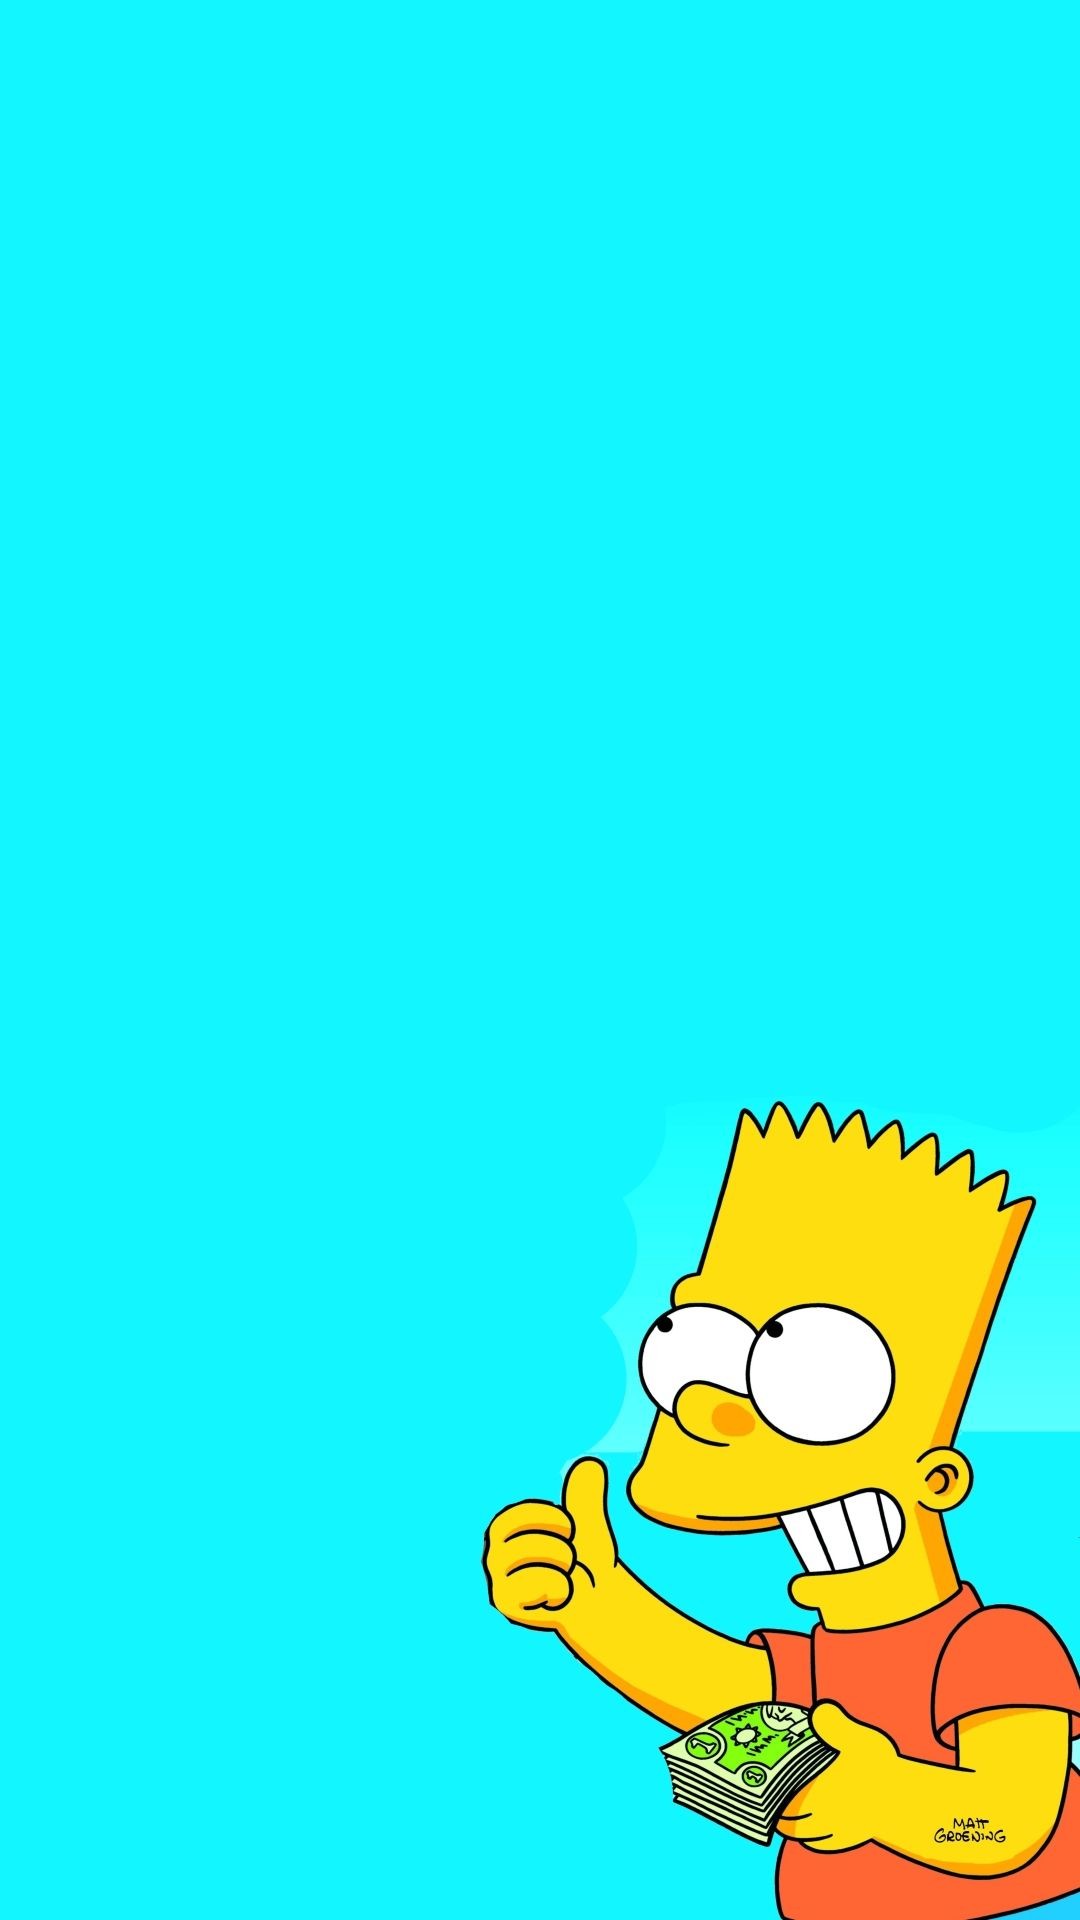 1080x1920 The Simpsons Wallpapers High Resolution and Quality Download